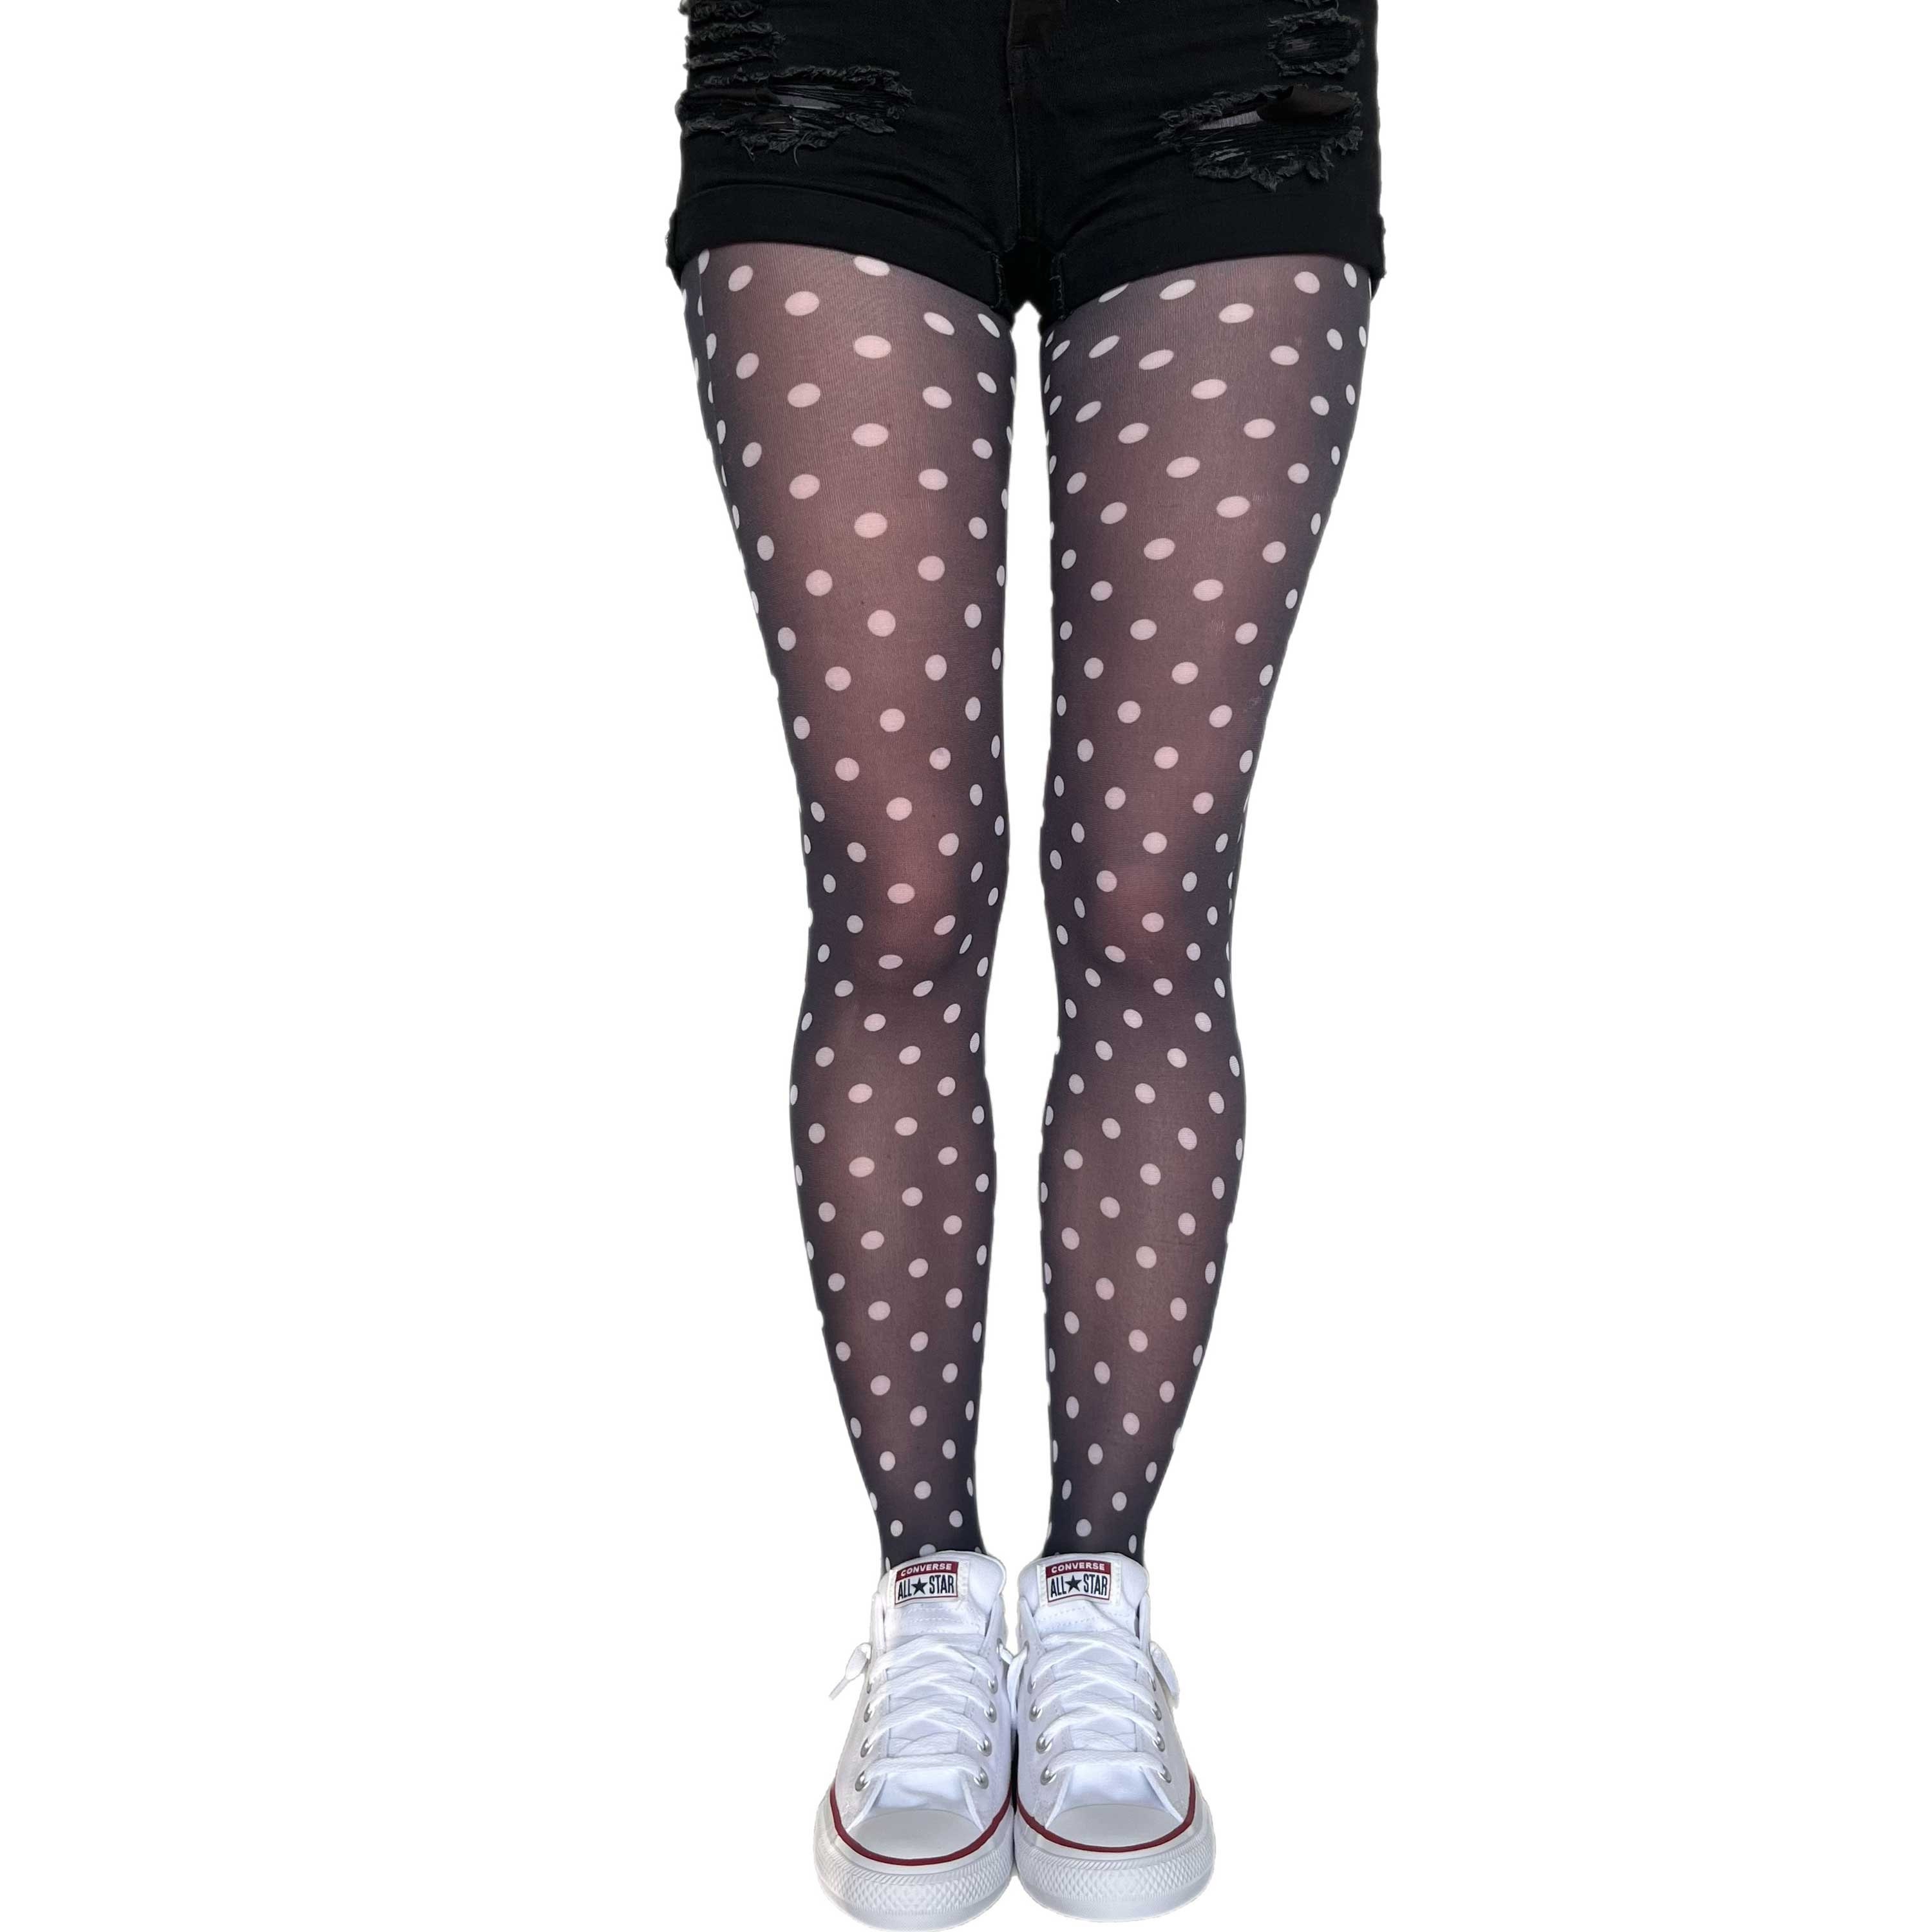 Women's Polka Dot Tights White Dotty Patterned Tights on Black